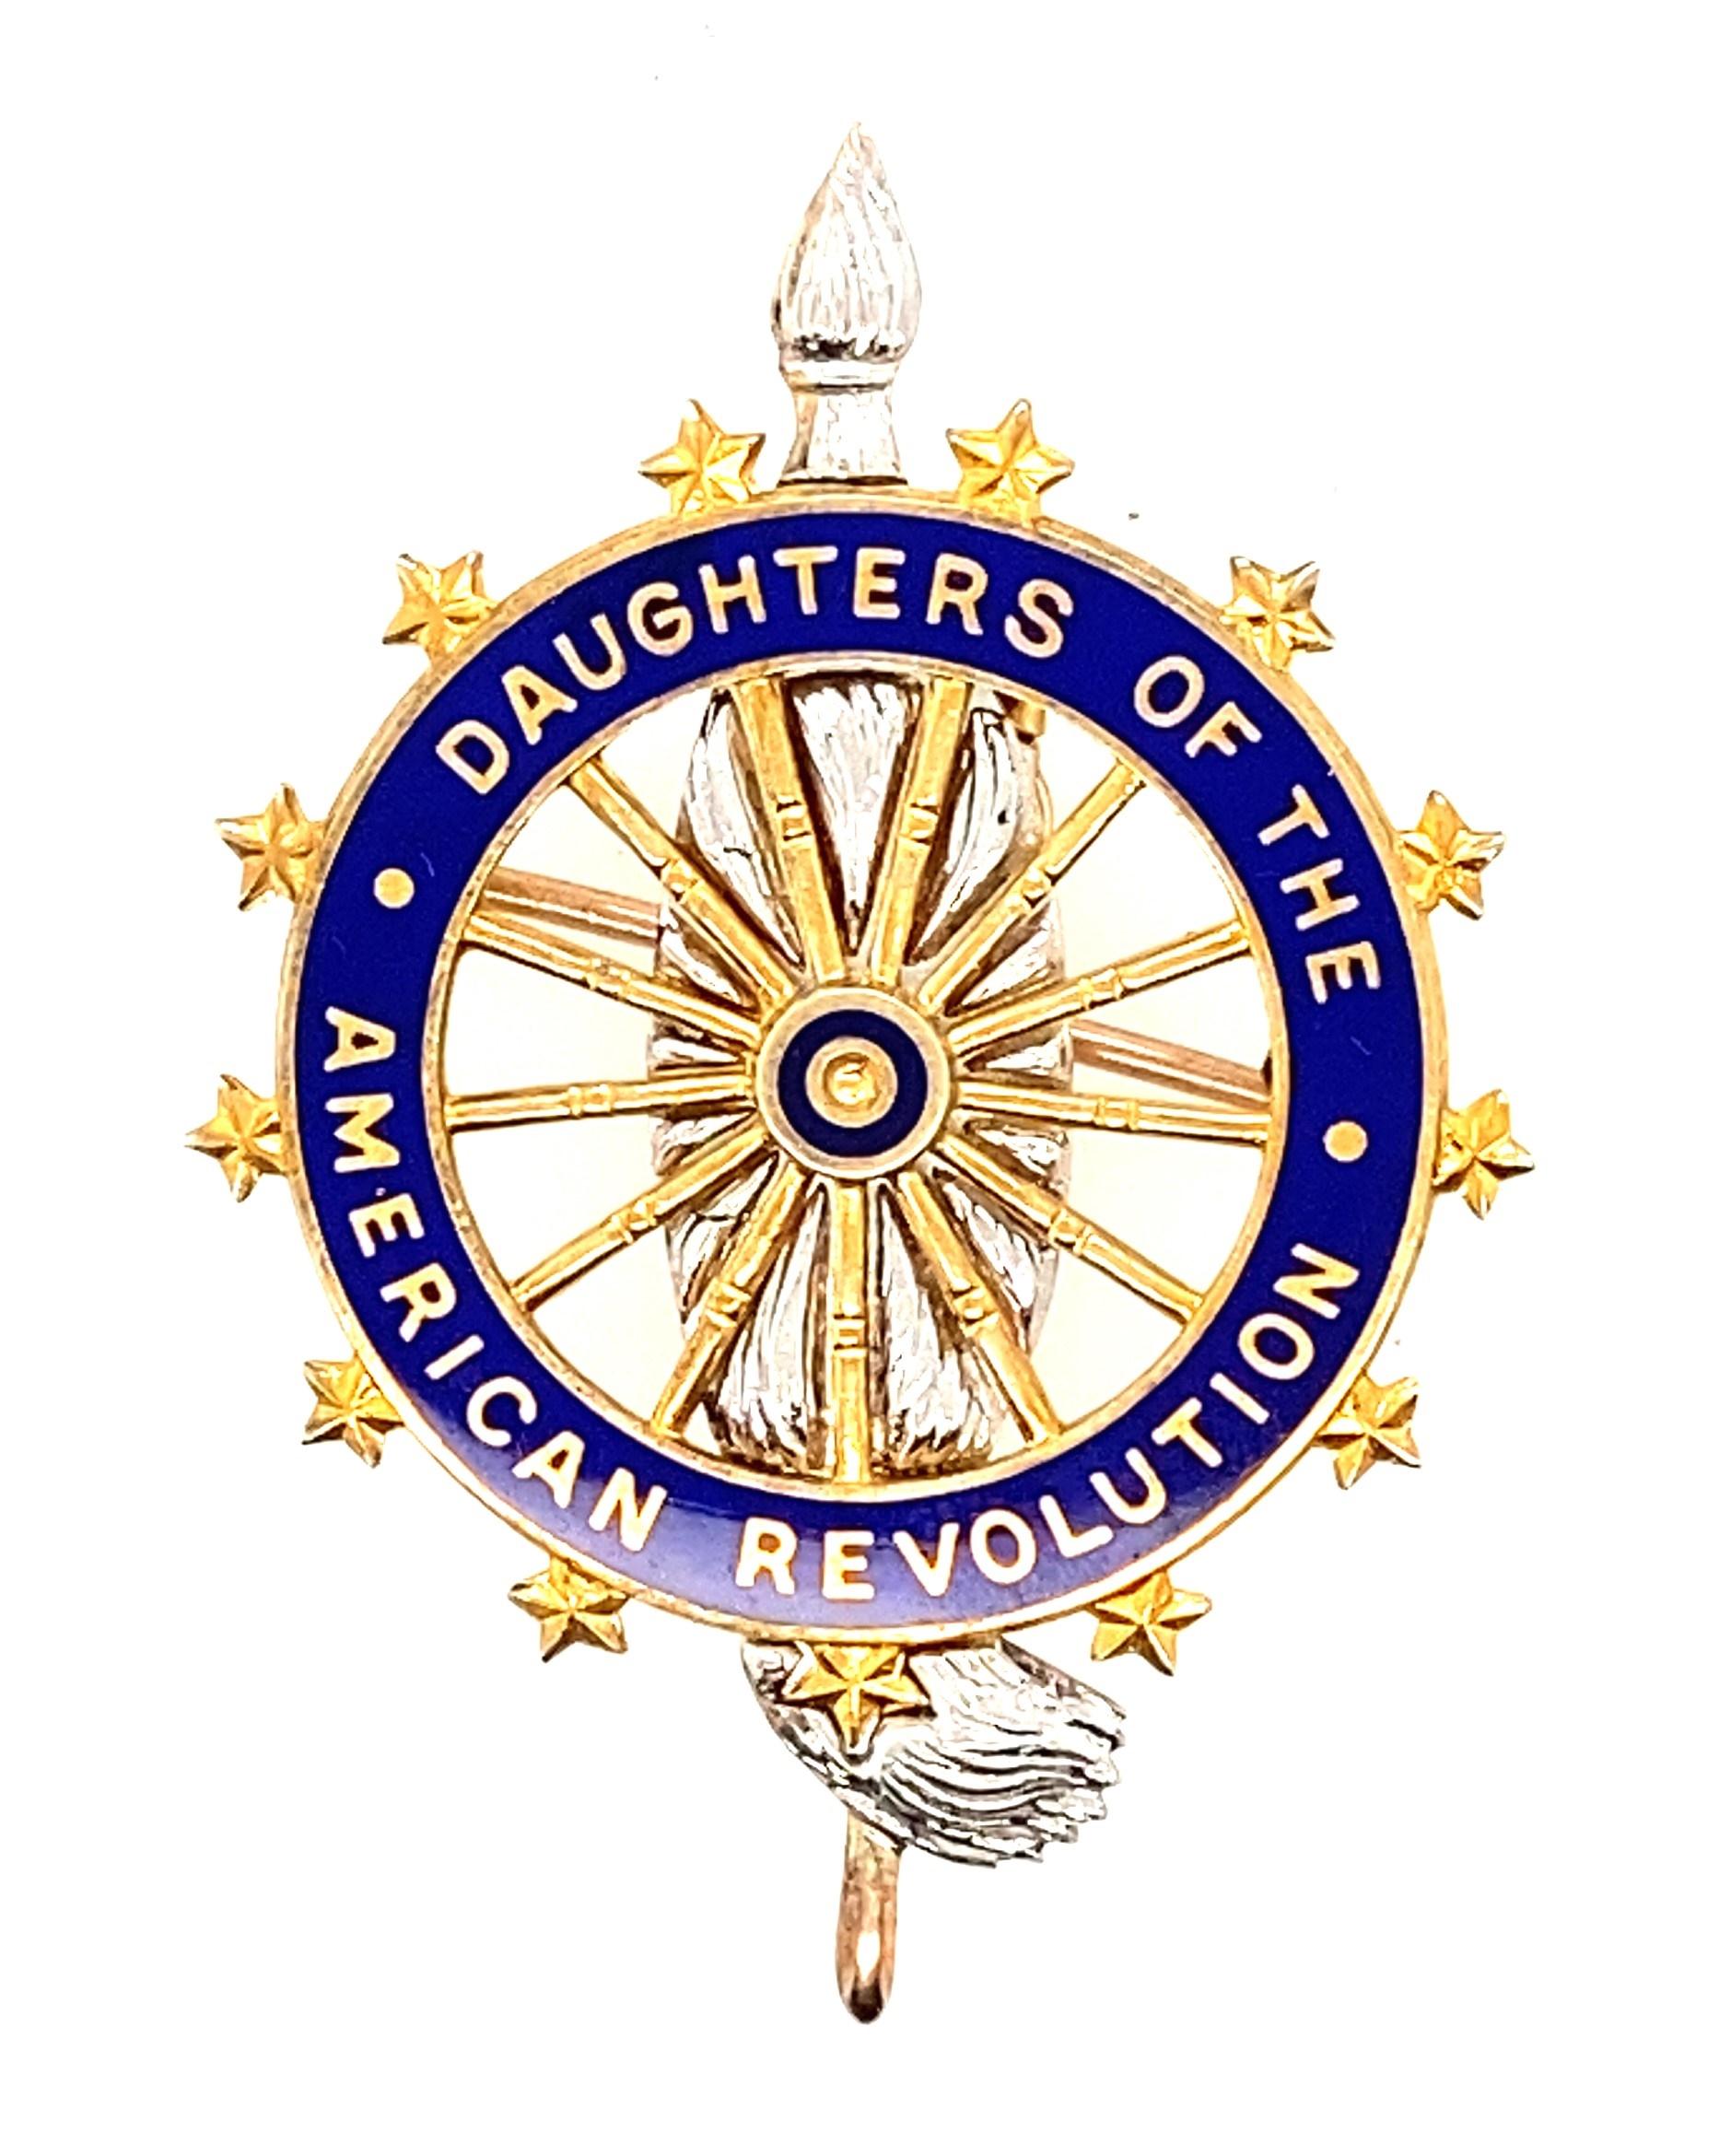 In its original embossed box, this 14k gold circa 1901-1909 brooch/pendant bears the emblem of the Daughters of the American Revolution. A spinning wheel with 13 spokes, representing the 13 original colonies, features 